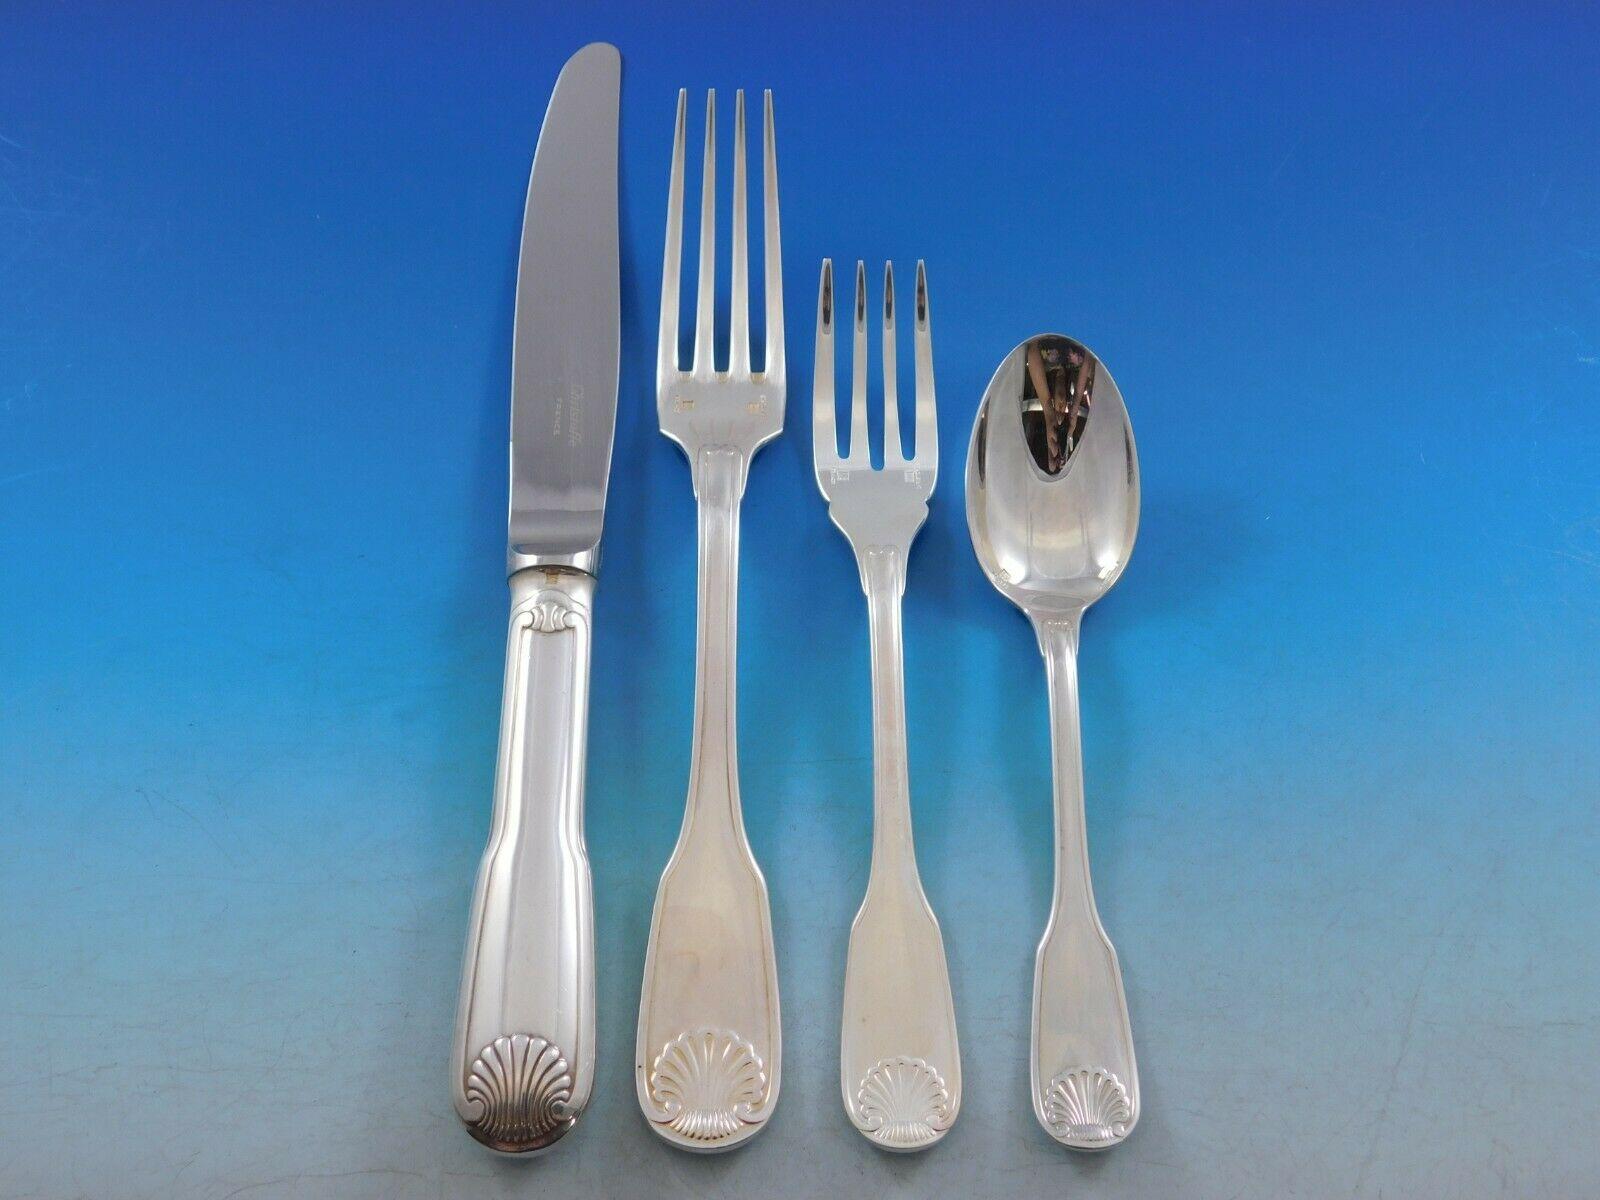 Outstanding dinner size Vendome Arcantia by Christofle France Silverplated flatware set, 147 pieces. This pattern featured the same shell motif that adorned the ceremonial silverware used during the reign of King Louis XIV. This set includes:

12